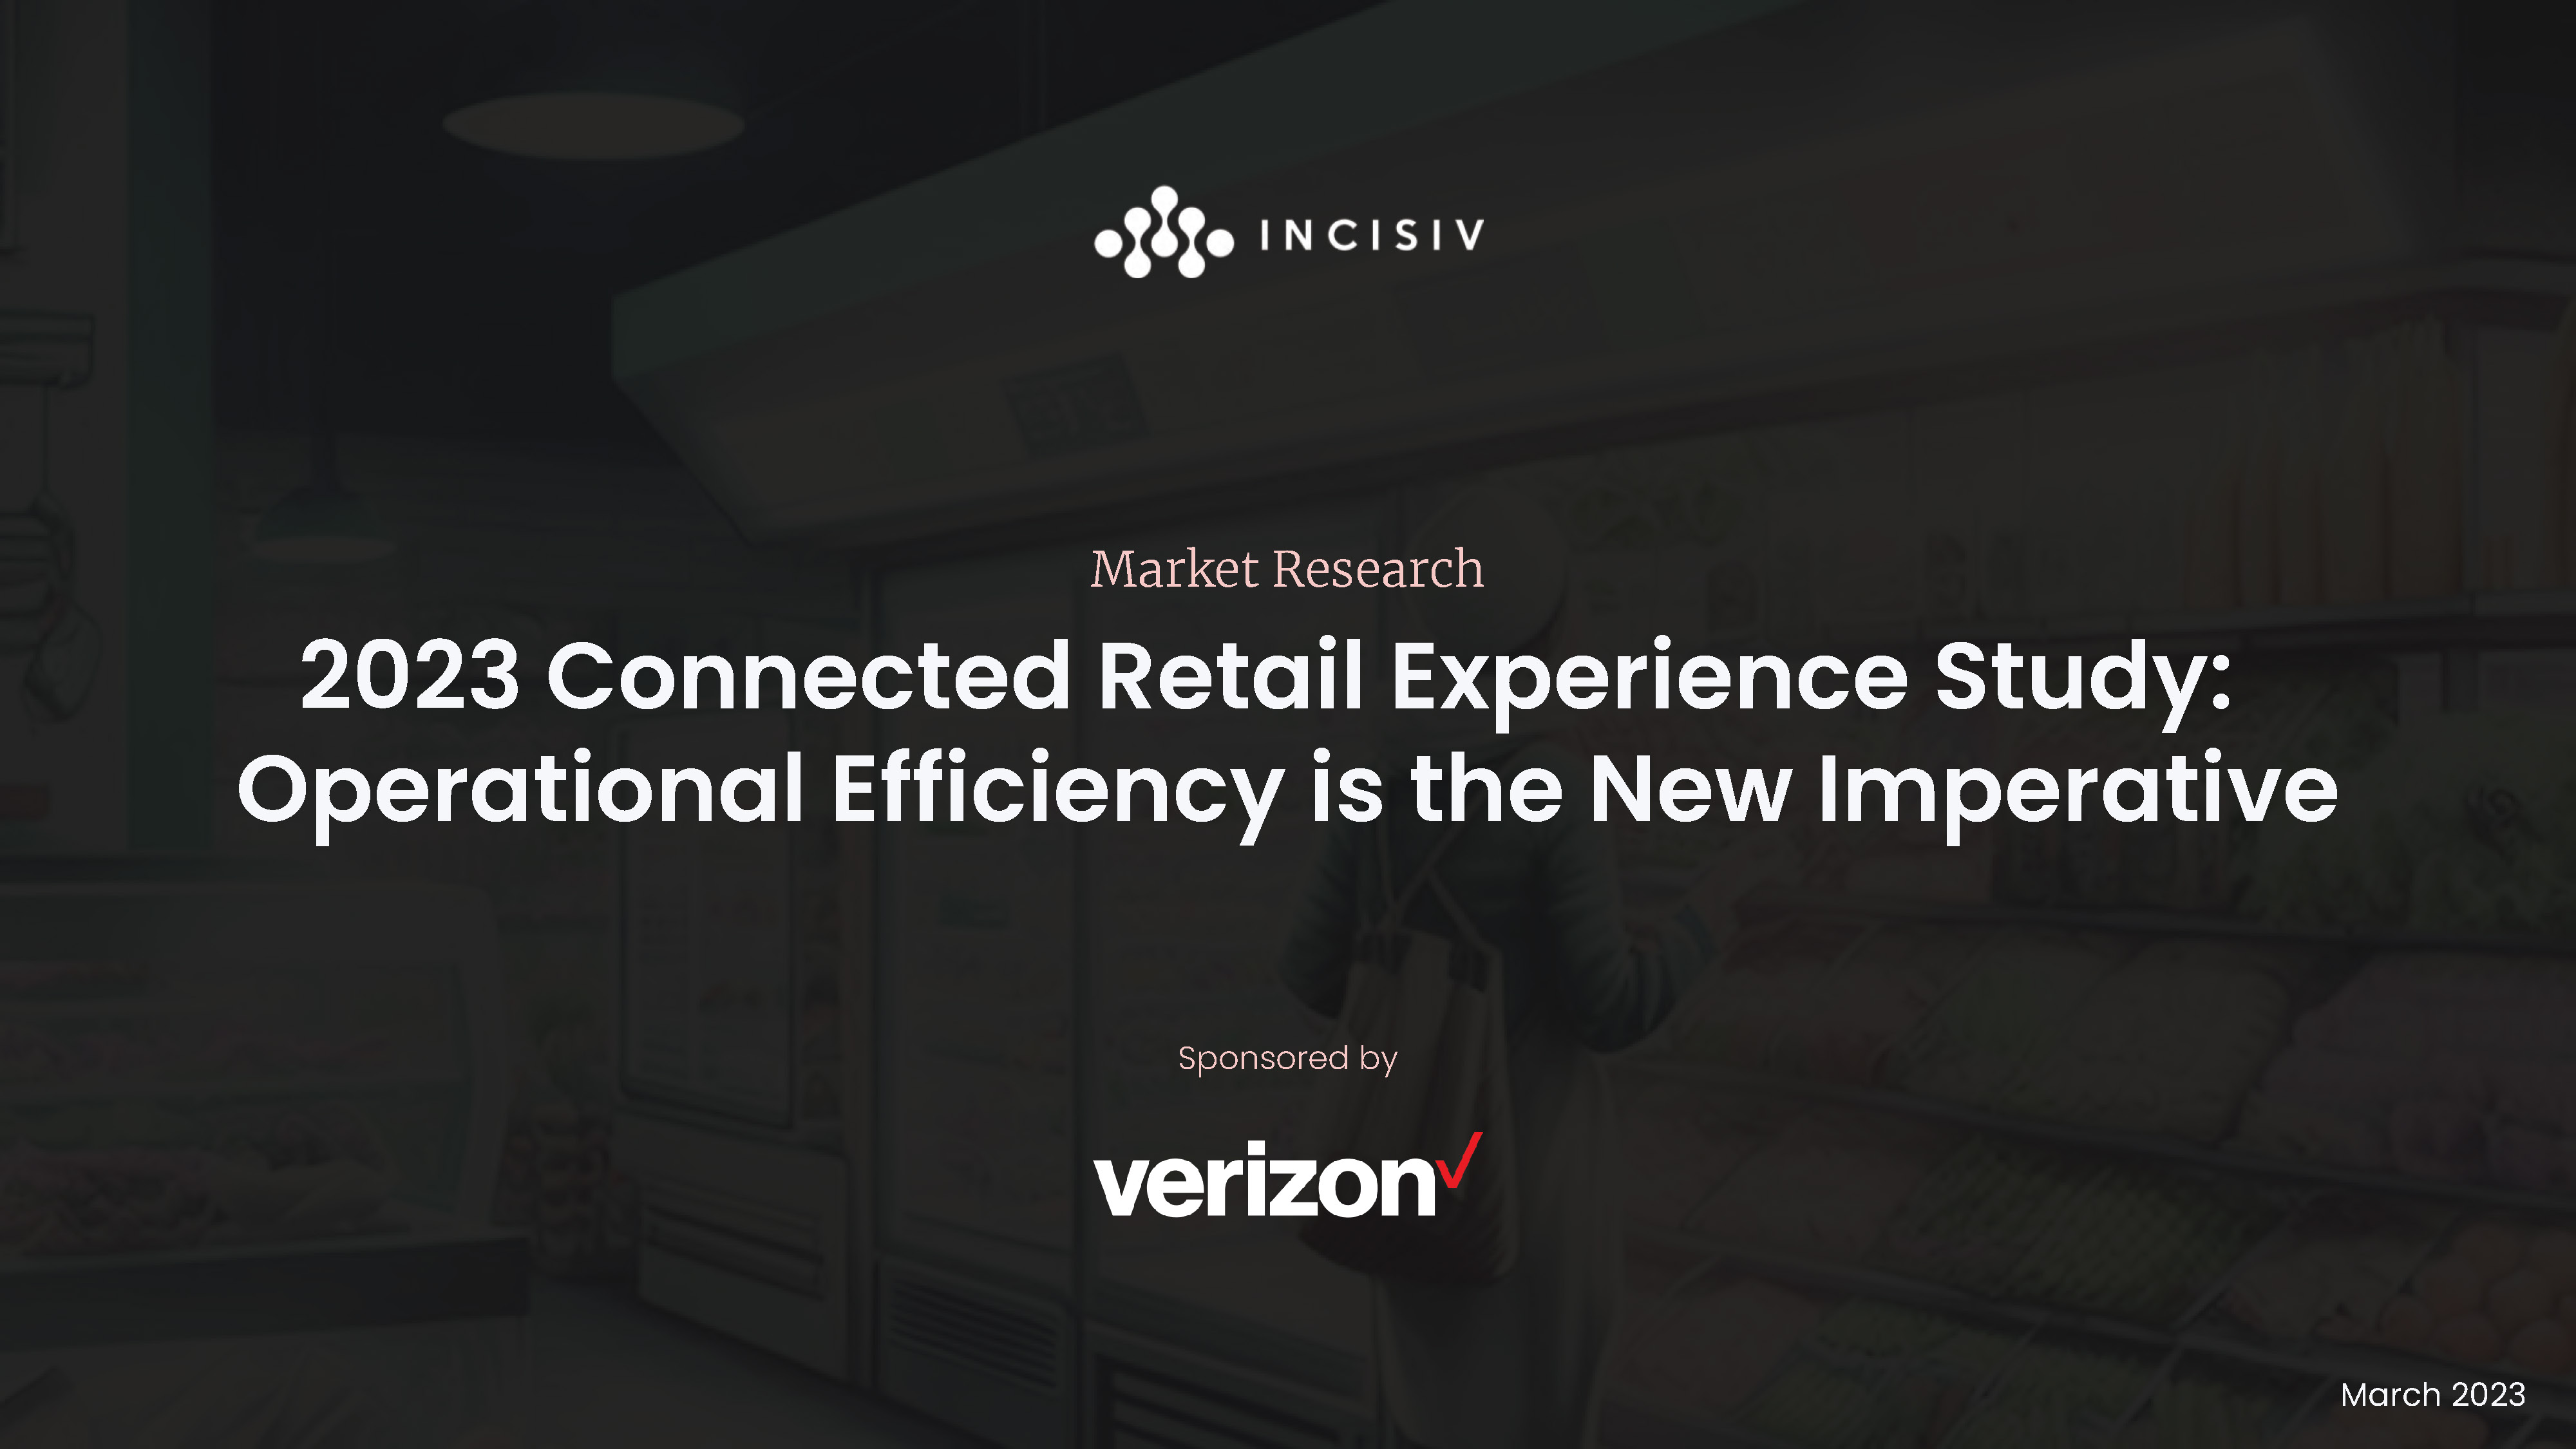 2023 Connected Retail Experience Study: Operational Efficiency is the New Imperative